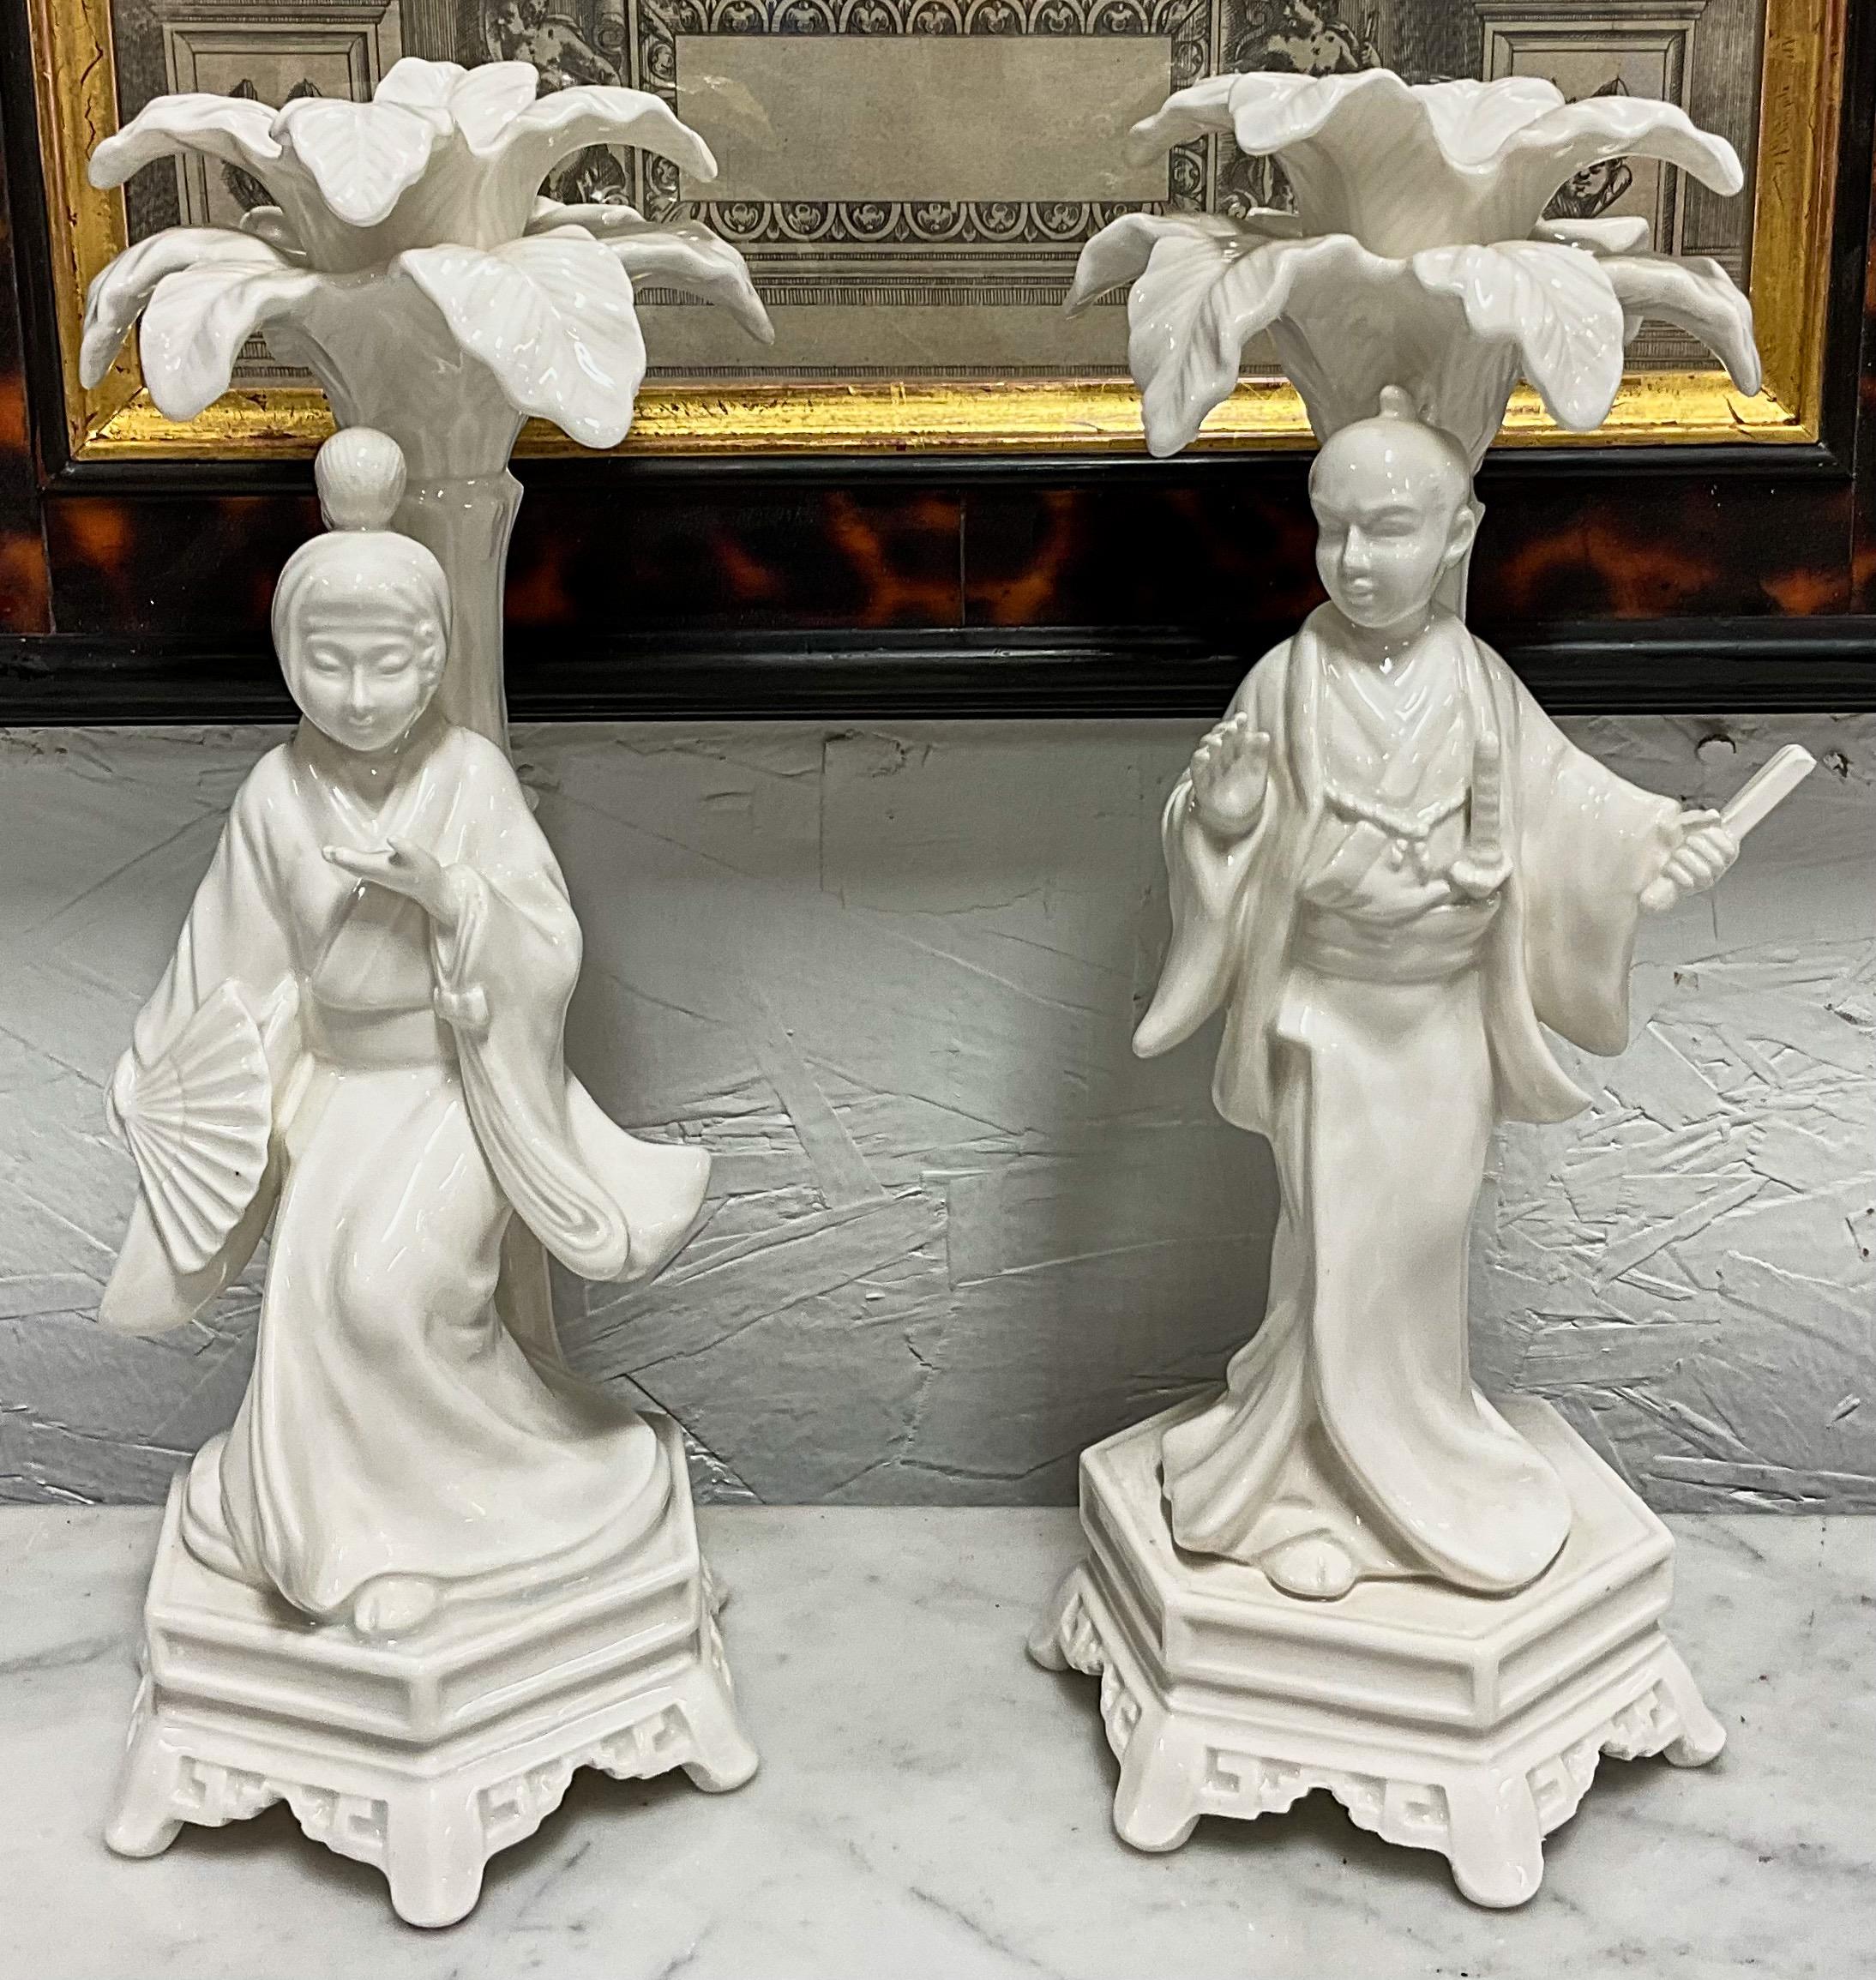 20th Century Blanc De Chine Regency Style Chinoiserie Candlesticks by Fitz & Floyd - S/2